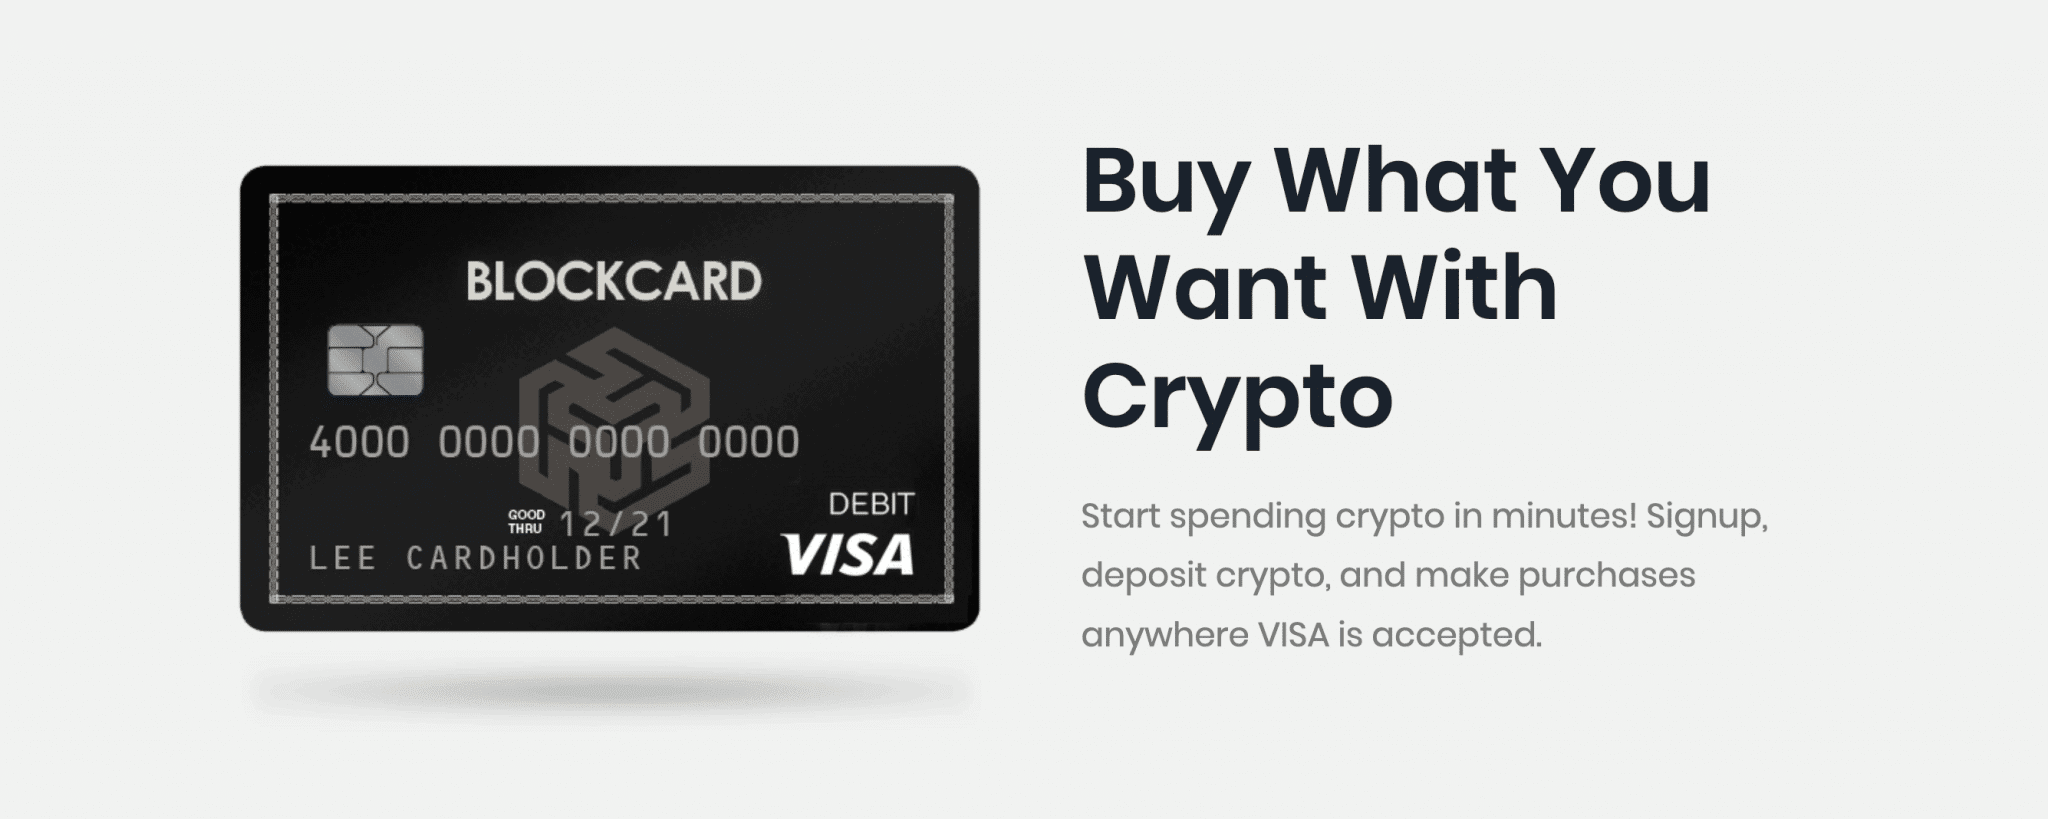 First-Ever Litecoin Debit Card Set To Be Launched - BitcoinWorld